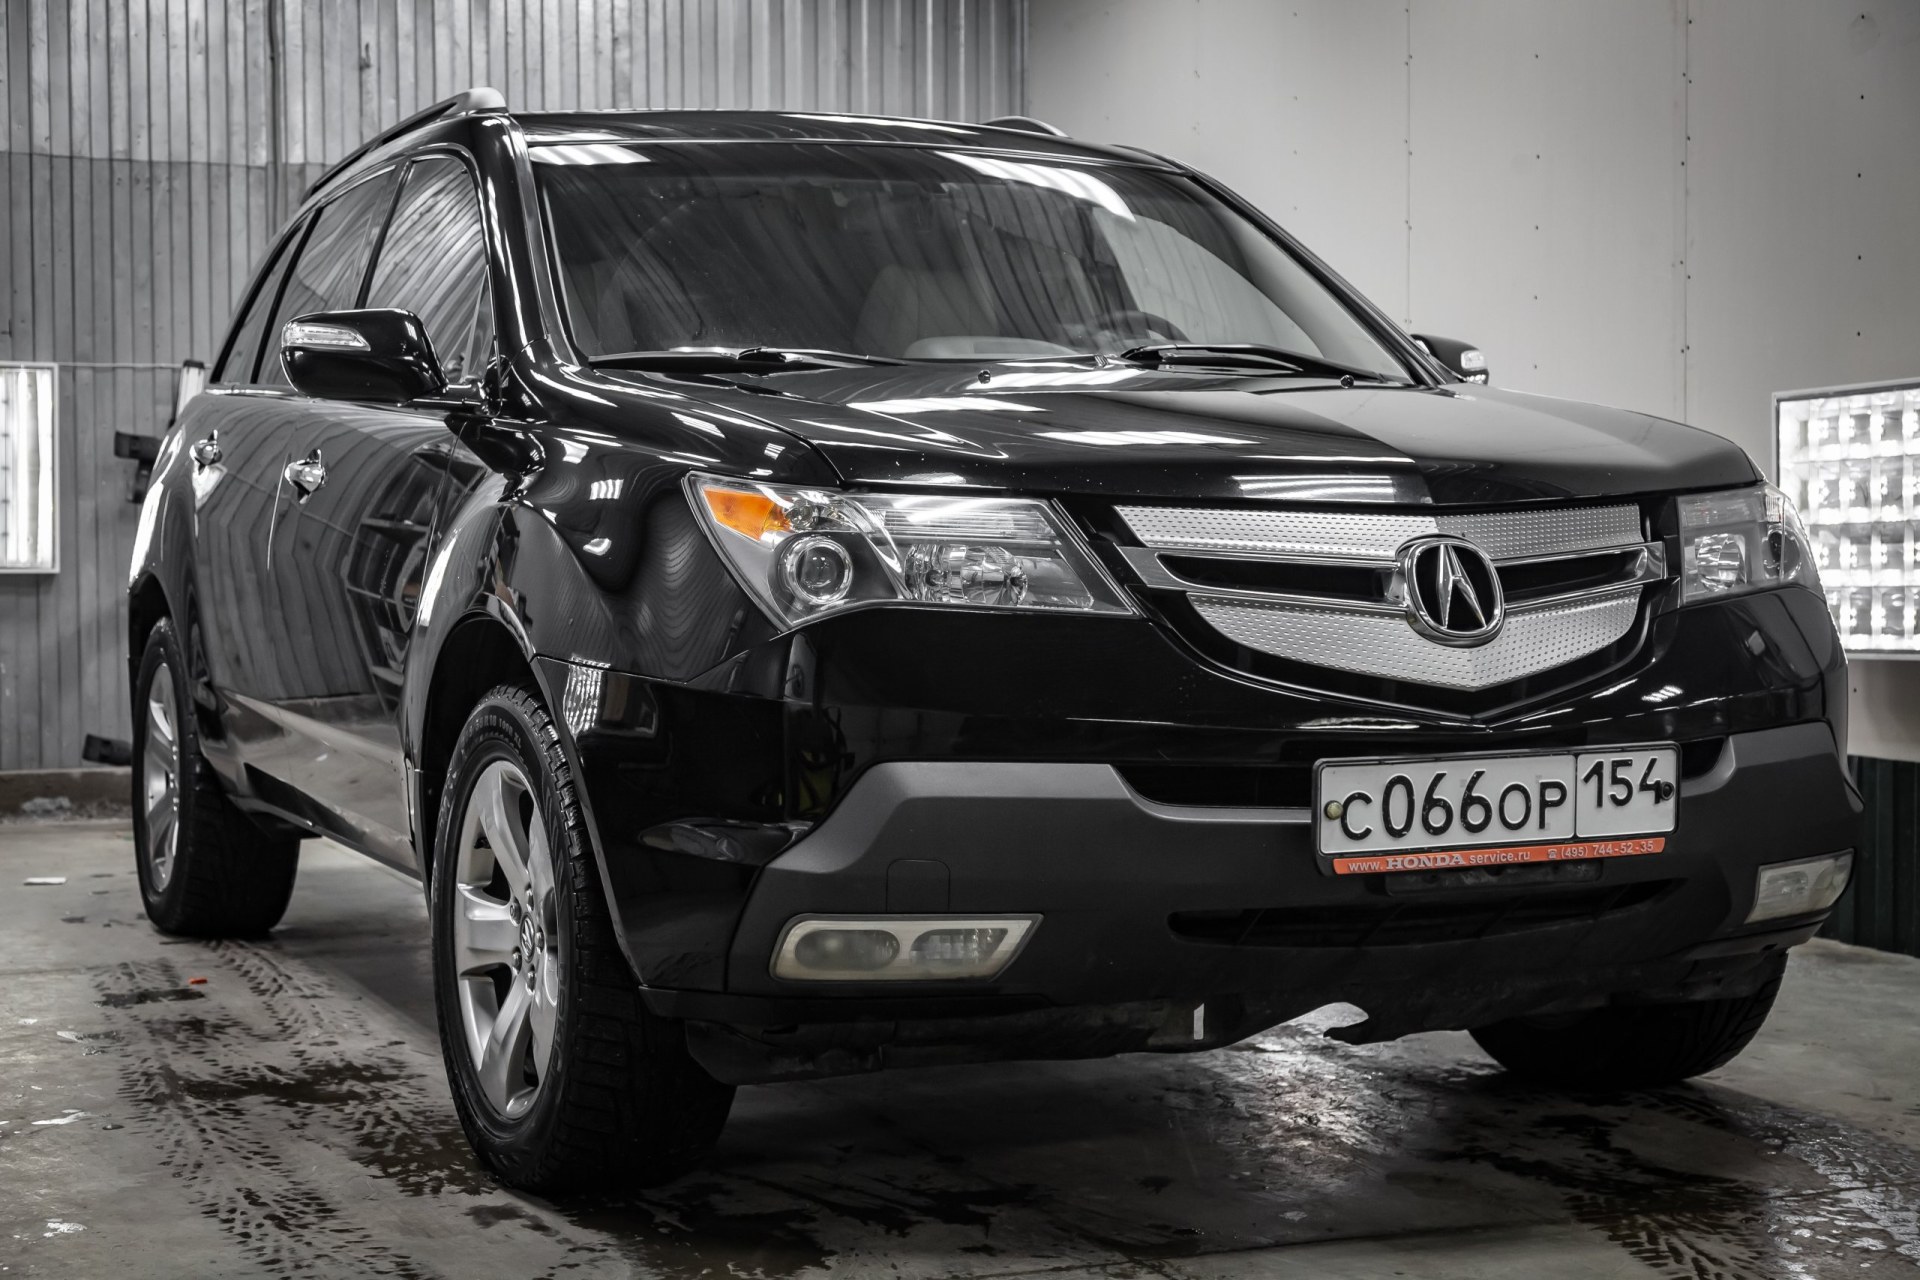 2009 Used Acura MDX black color with headlights standing in the light service box of the detailing workshop